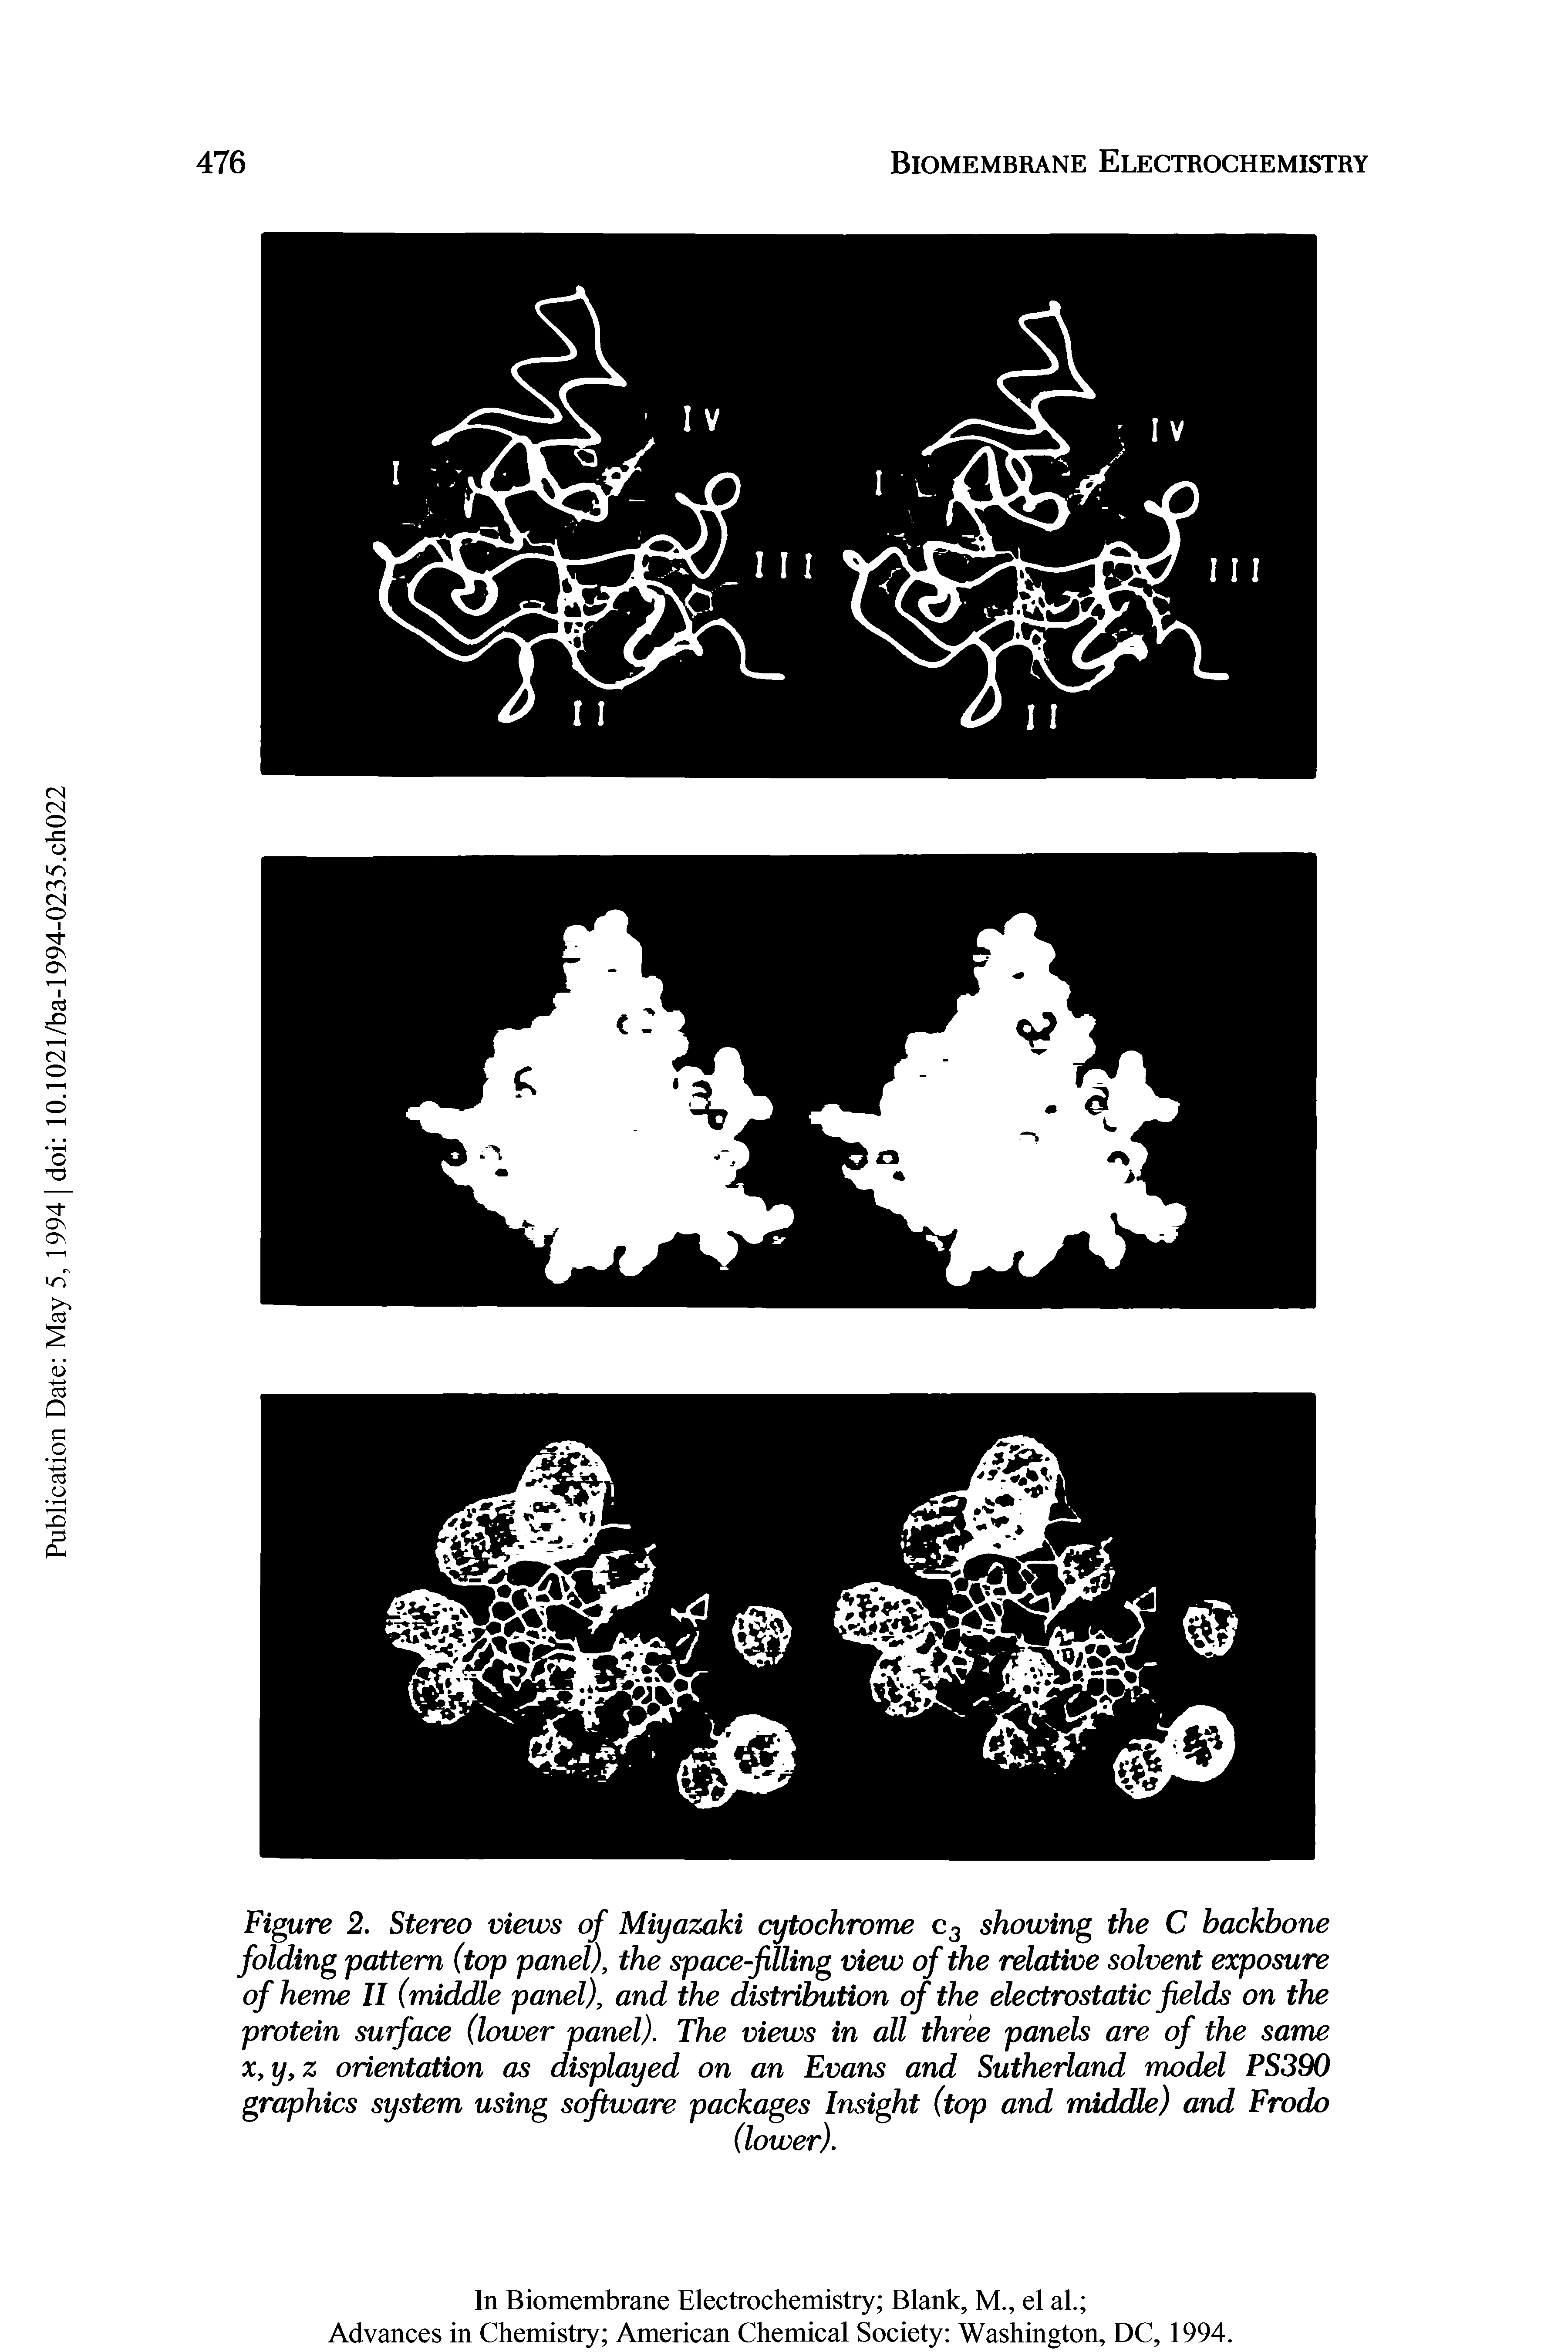 Figure 2. Stereo views of Miyazaki cytochrome c3 showing the C backbone folding pattern (top panel), the space-filling view of the relative solvent exposure of heme II (middle panel), and the distribution of the electrostatic fields on the protein surface (lower panel). The views in all three panels are of the same x,y,z orientation as displayed on an Evans and Sutherland model PS390 graphics system using software packages Insight (top and middle) and Frodo...